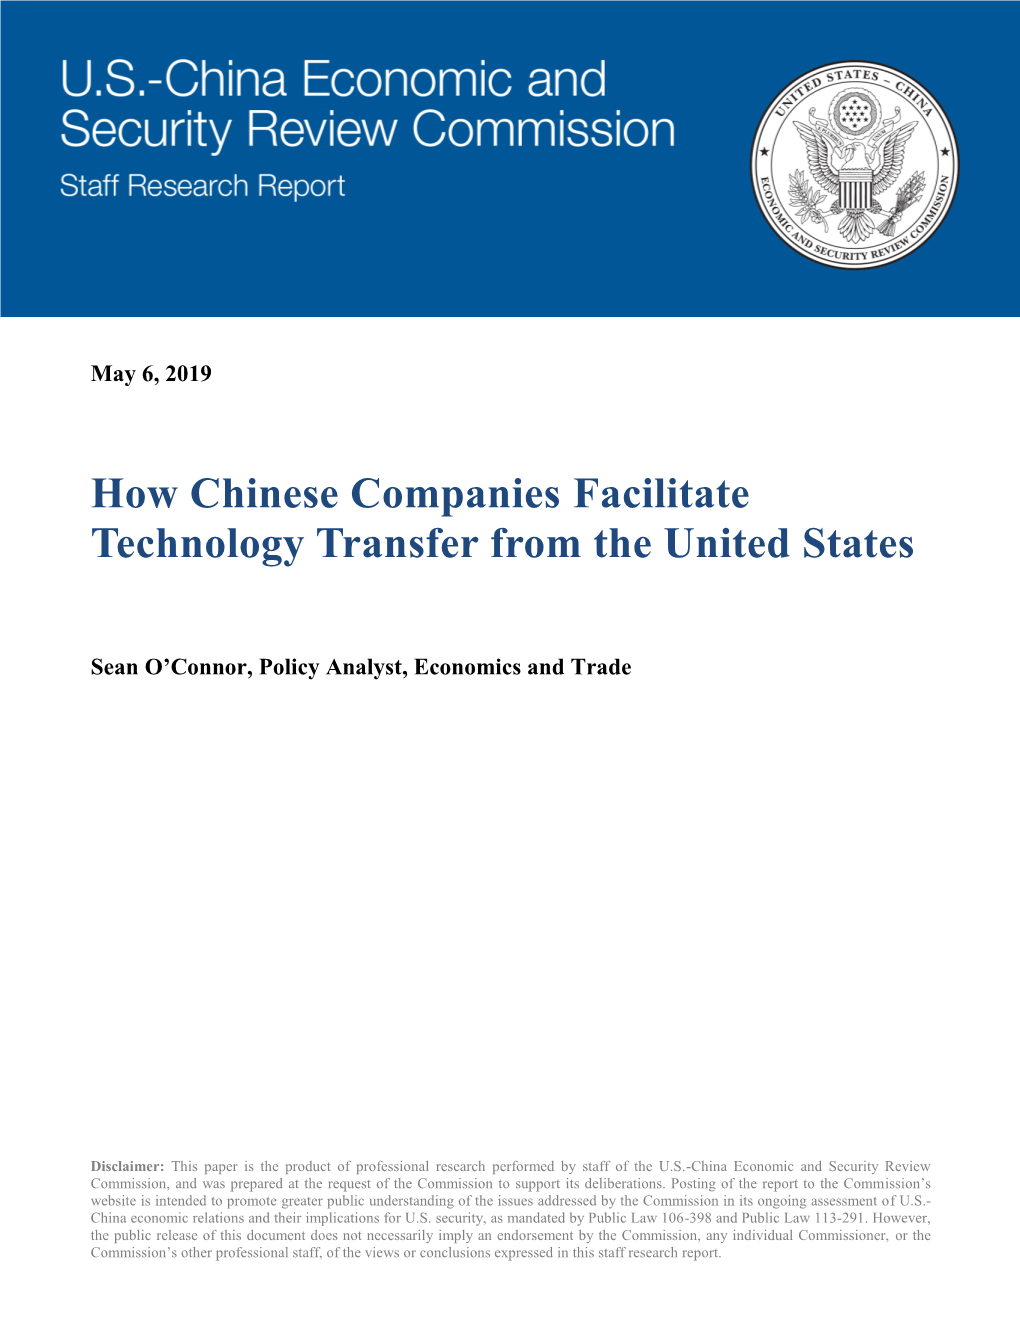 How Chinese Companies Facilitate Technology Transfer from the United States